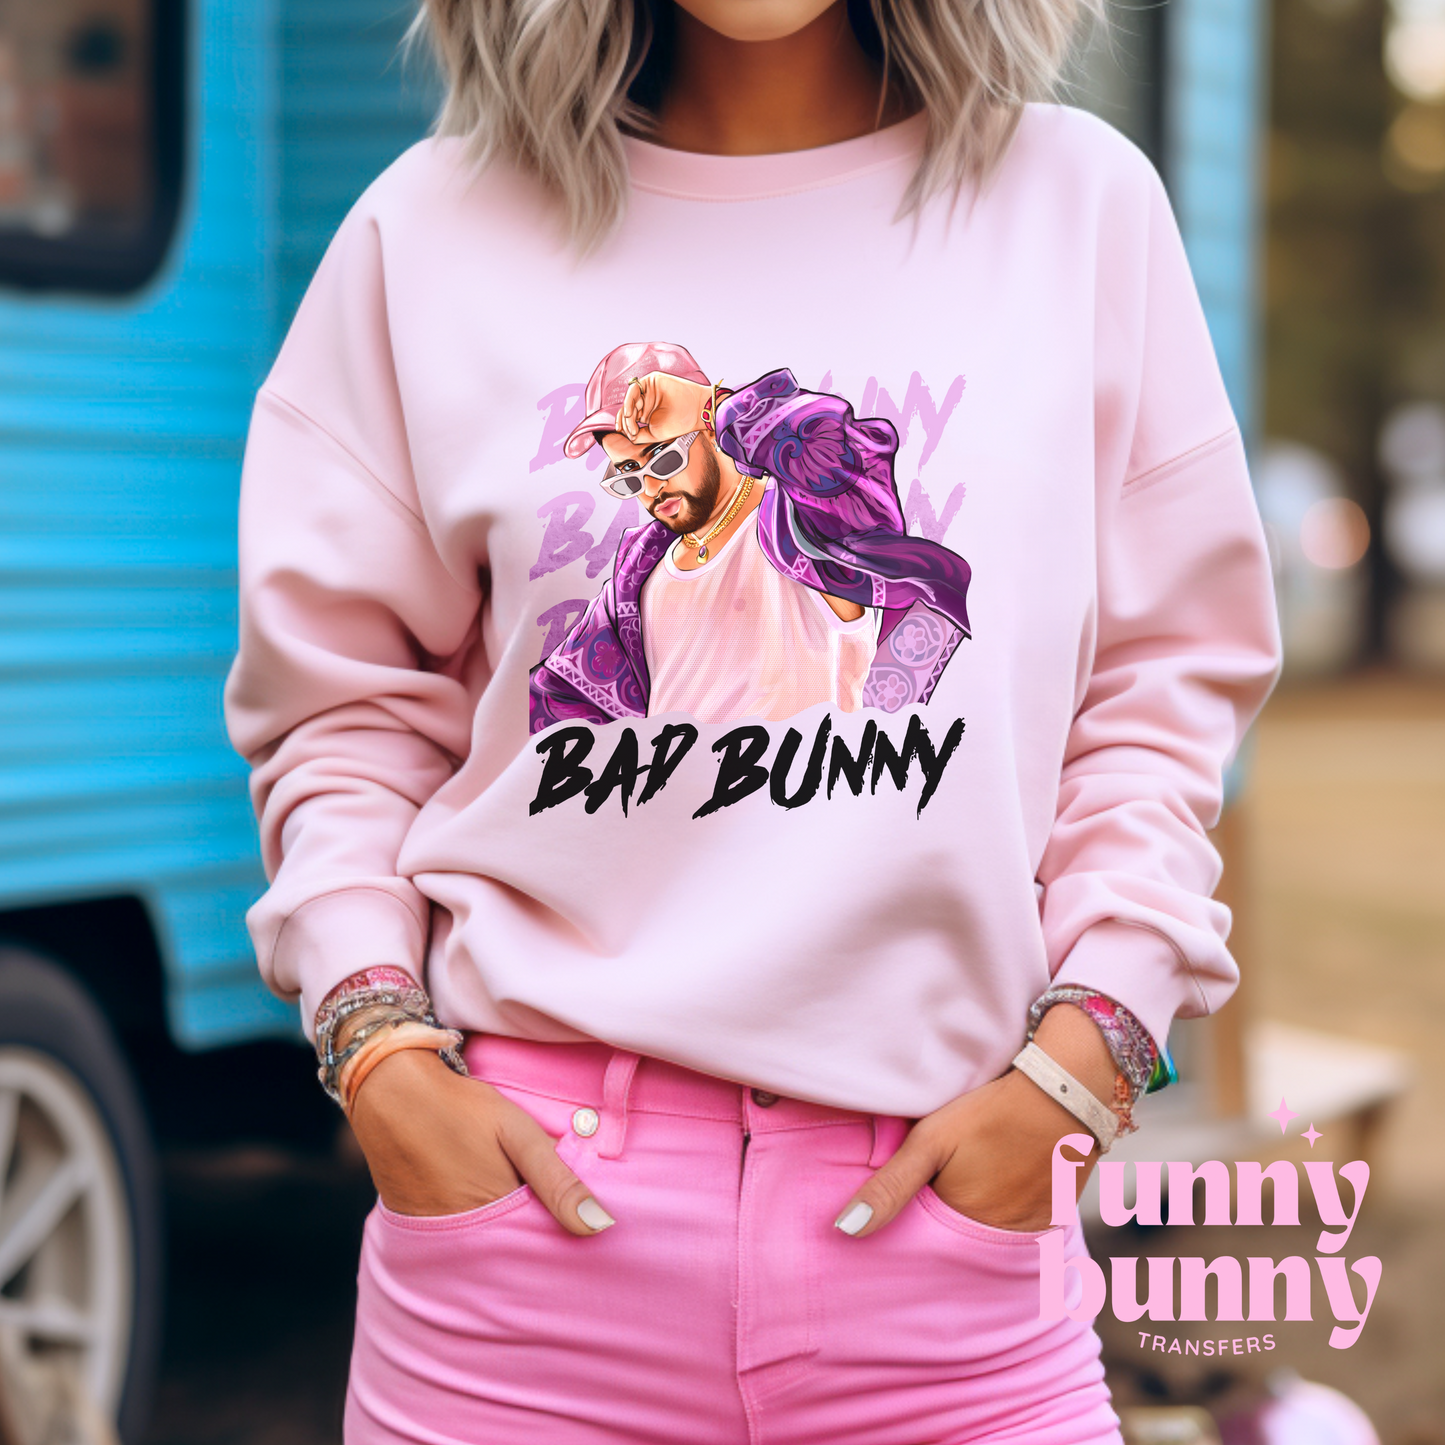 Bad Bunny Style - Thin Clear Film Matte